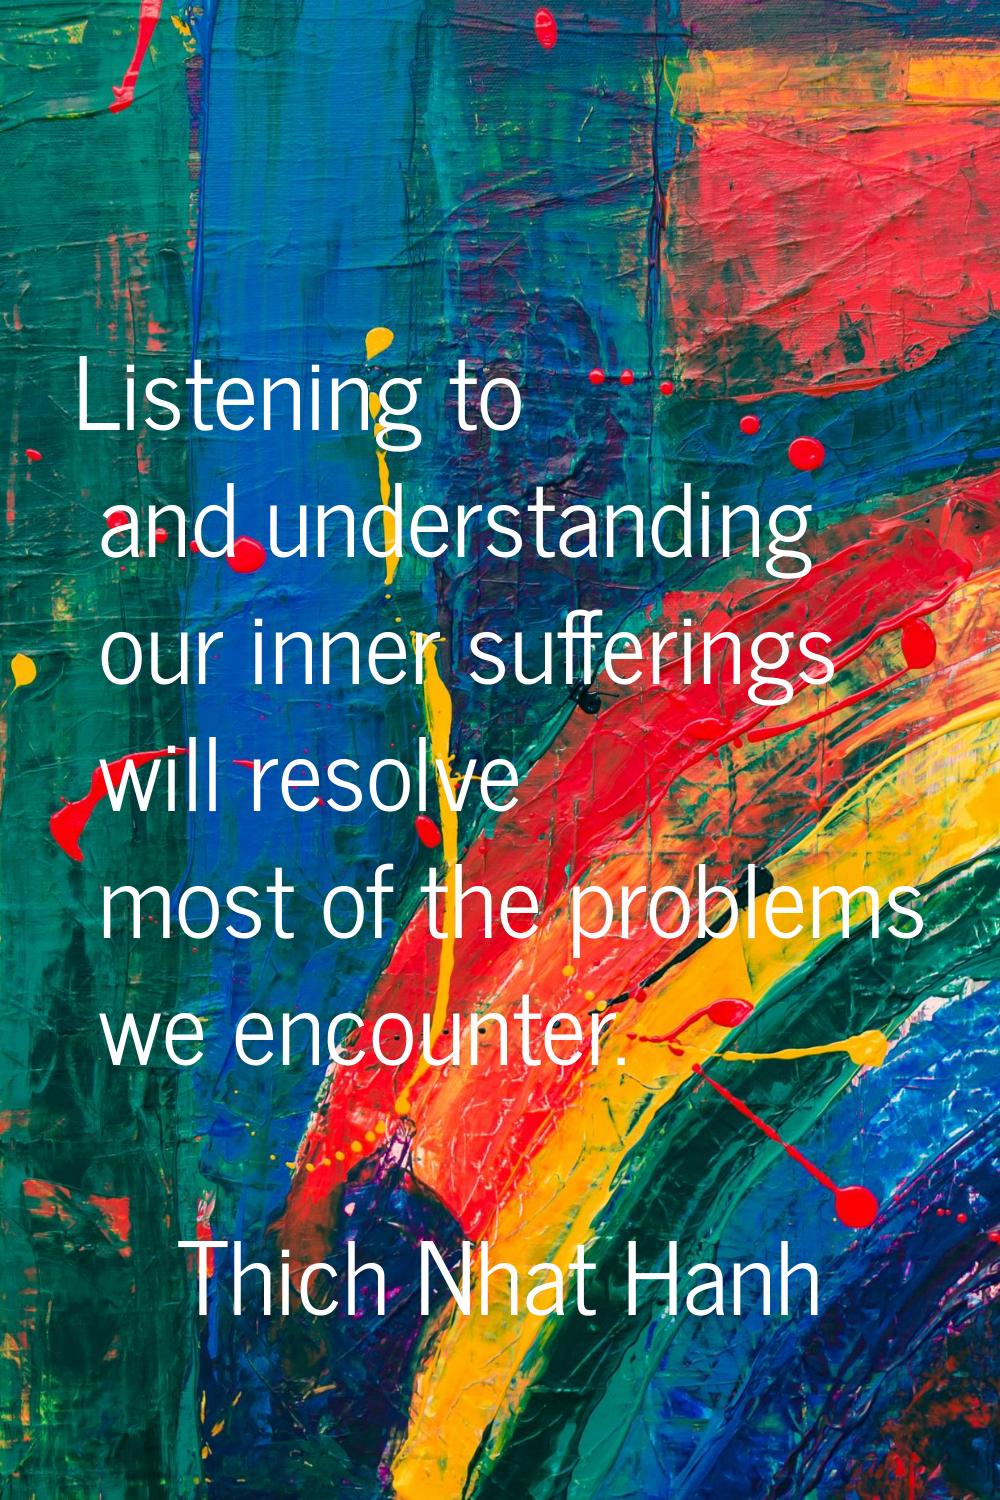 Listening to and understanding our inner sufferings will resolve most of the problems we encounter.